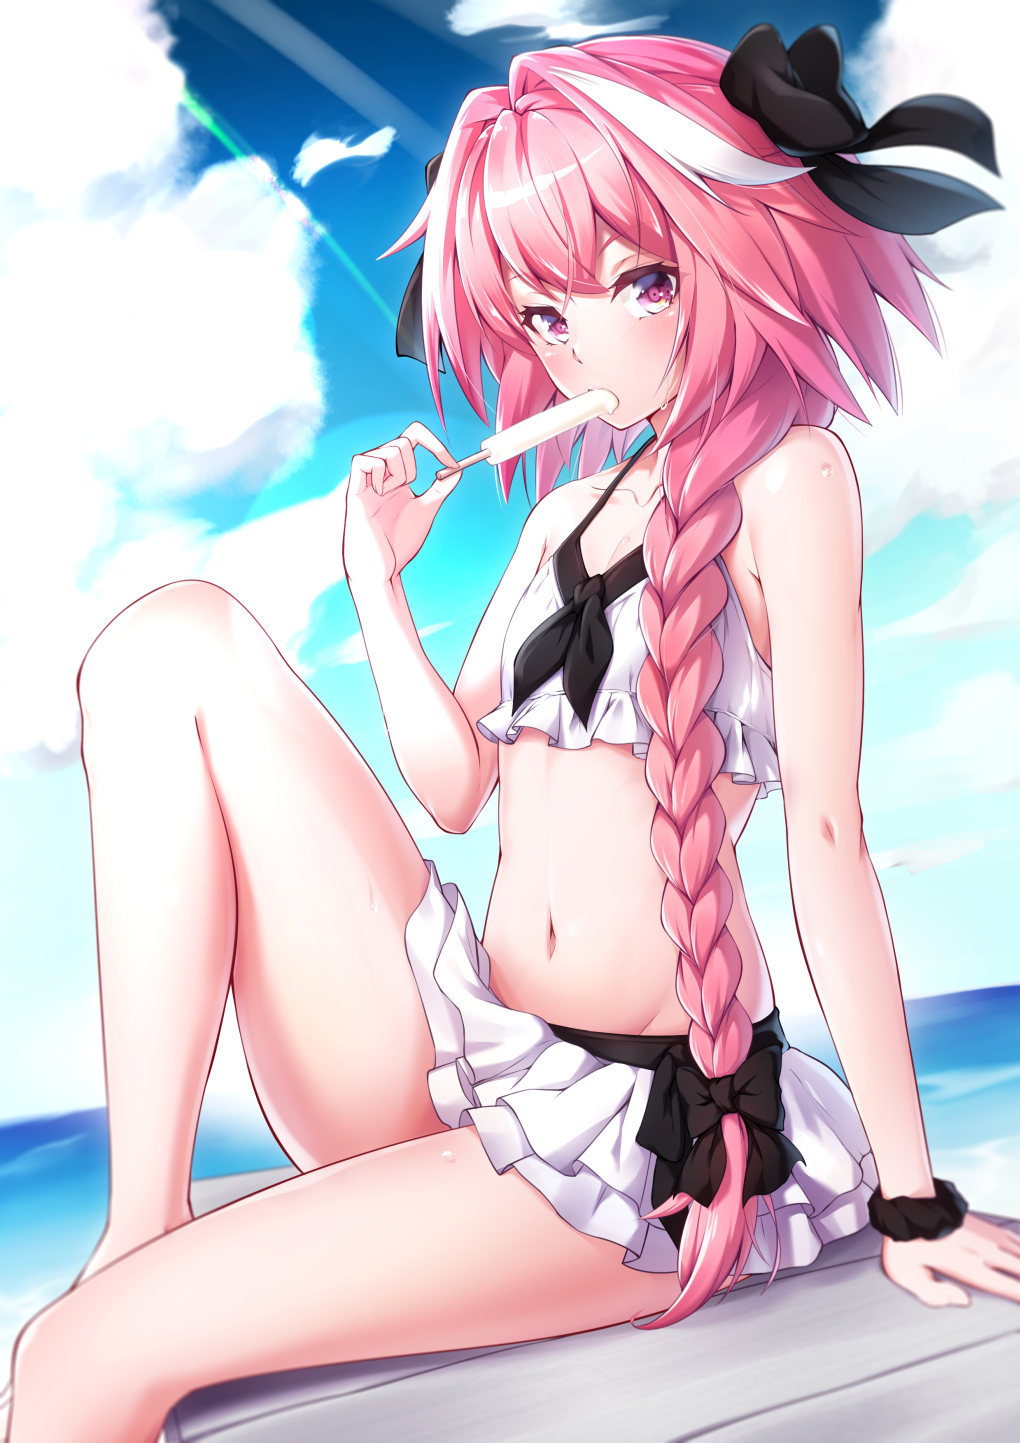 Anime 1020x1443 takatun Astolfo (Fate/Apocrypha) Fate series Fate/Grand Order Fate/Apocrypha  pink hair anime boys swimwear popsicle suggestive clouds water femboy